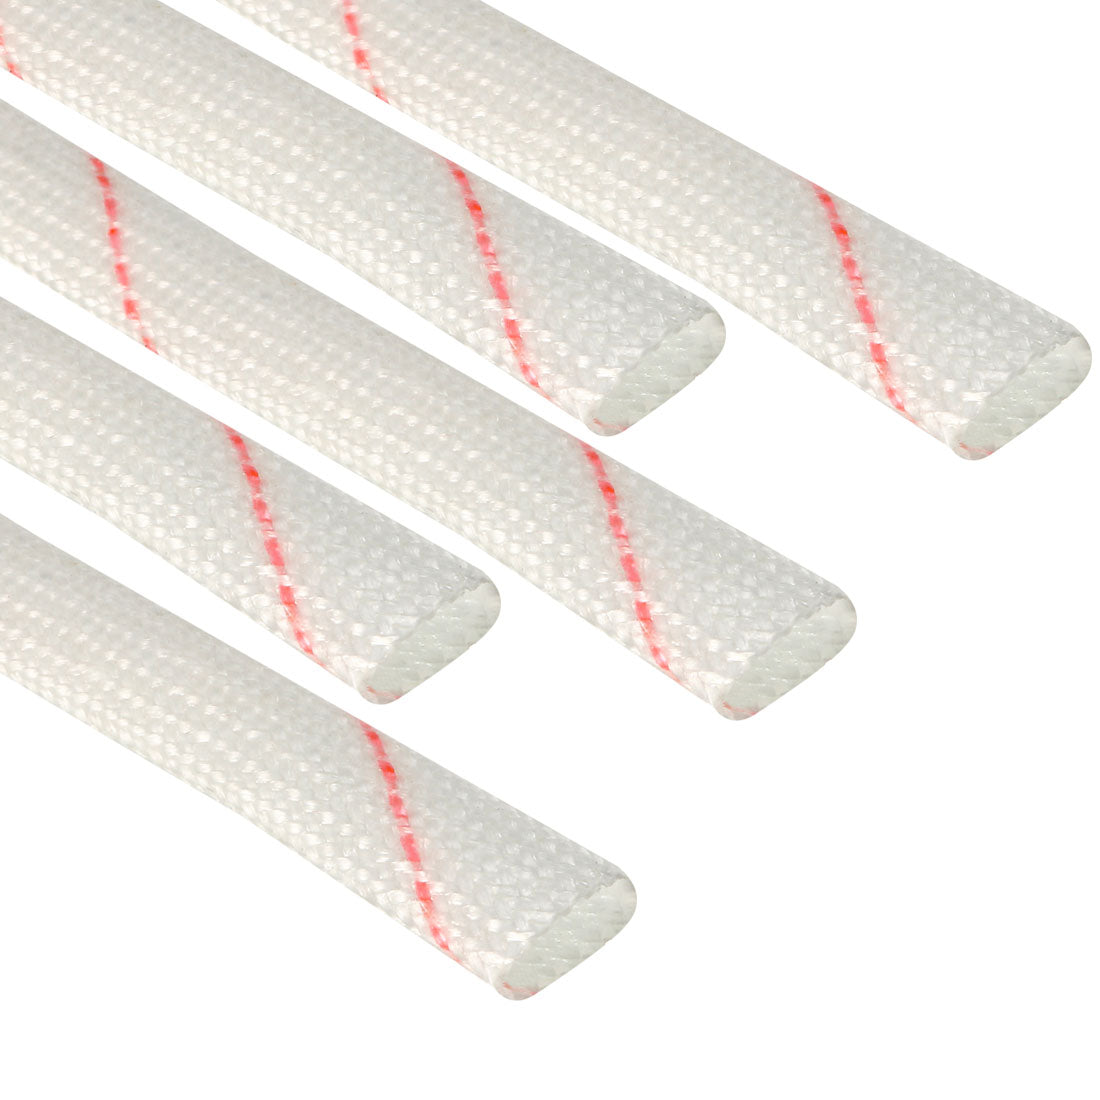 uxcell Uxcell Fiberglass Sleeve 8mm I.D. PVC Insulation Tubing 1500V Tube Adjustable Sleeving Pipe 125 Degree Centigrade Cable Wrap Wire 780mm 2.56ft 5Pcs